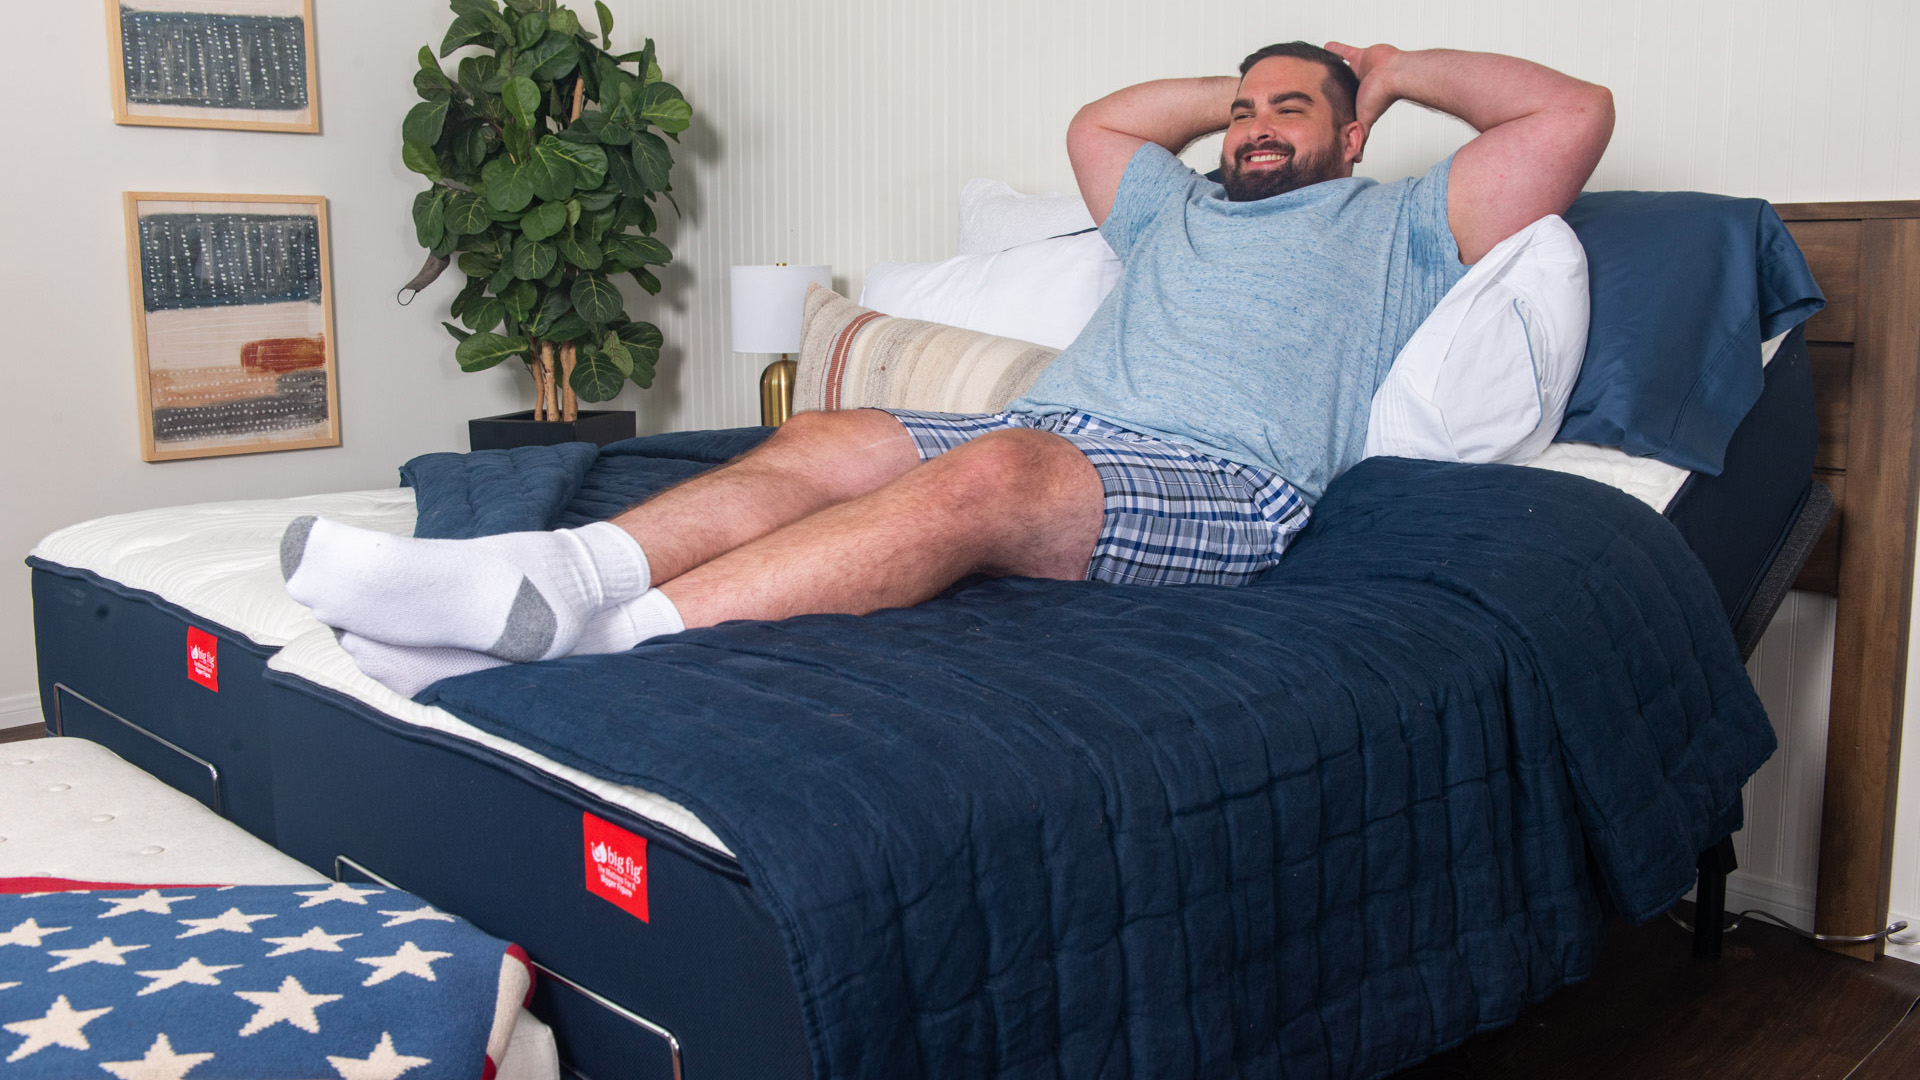 A man in a blue t-shirt relaxes on the Big Fig hybrid mattress